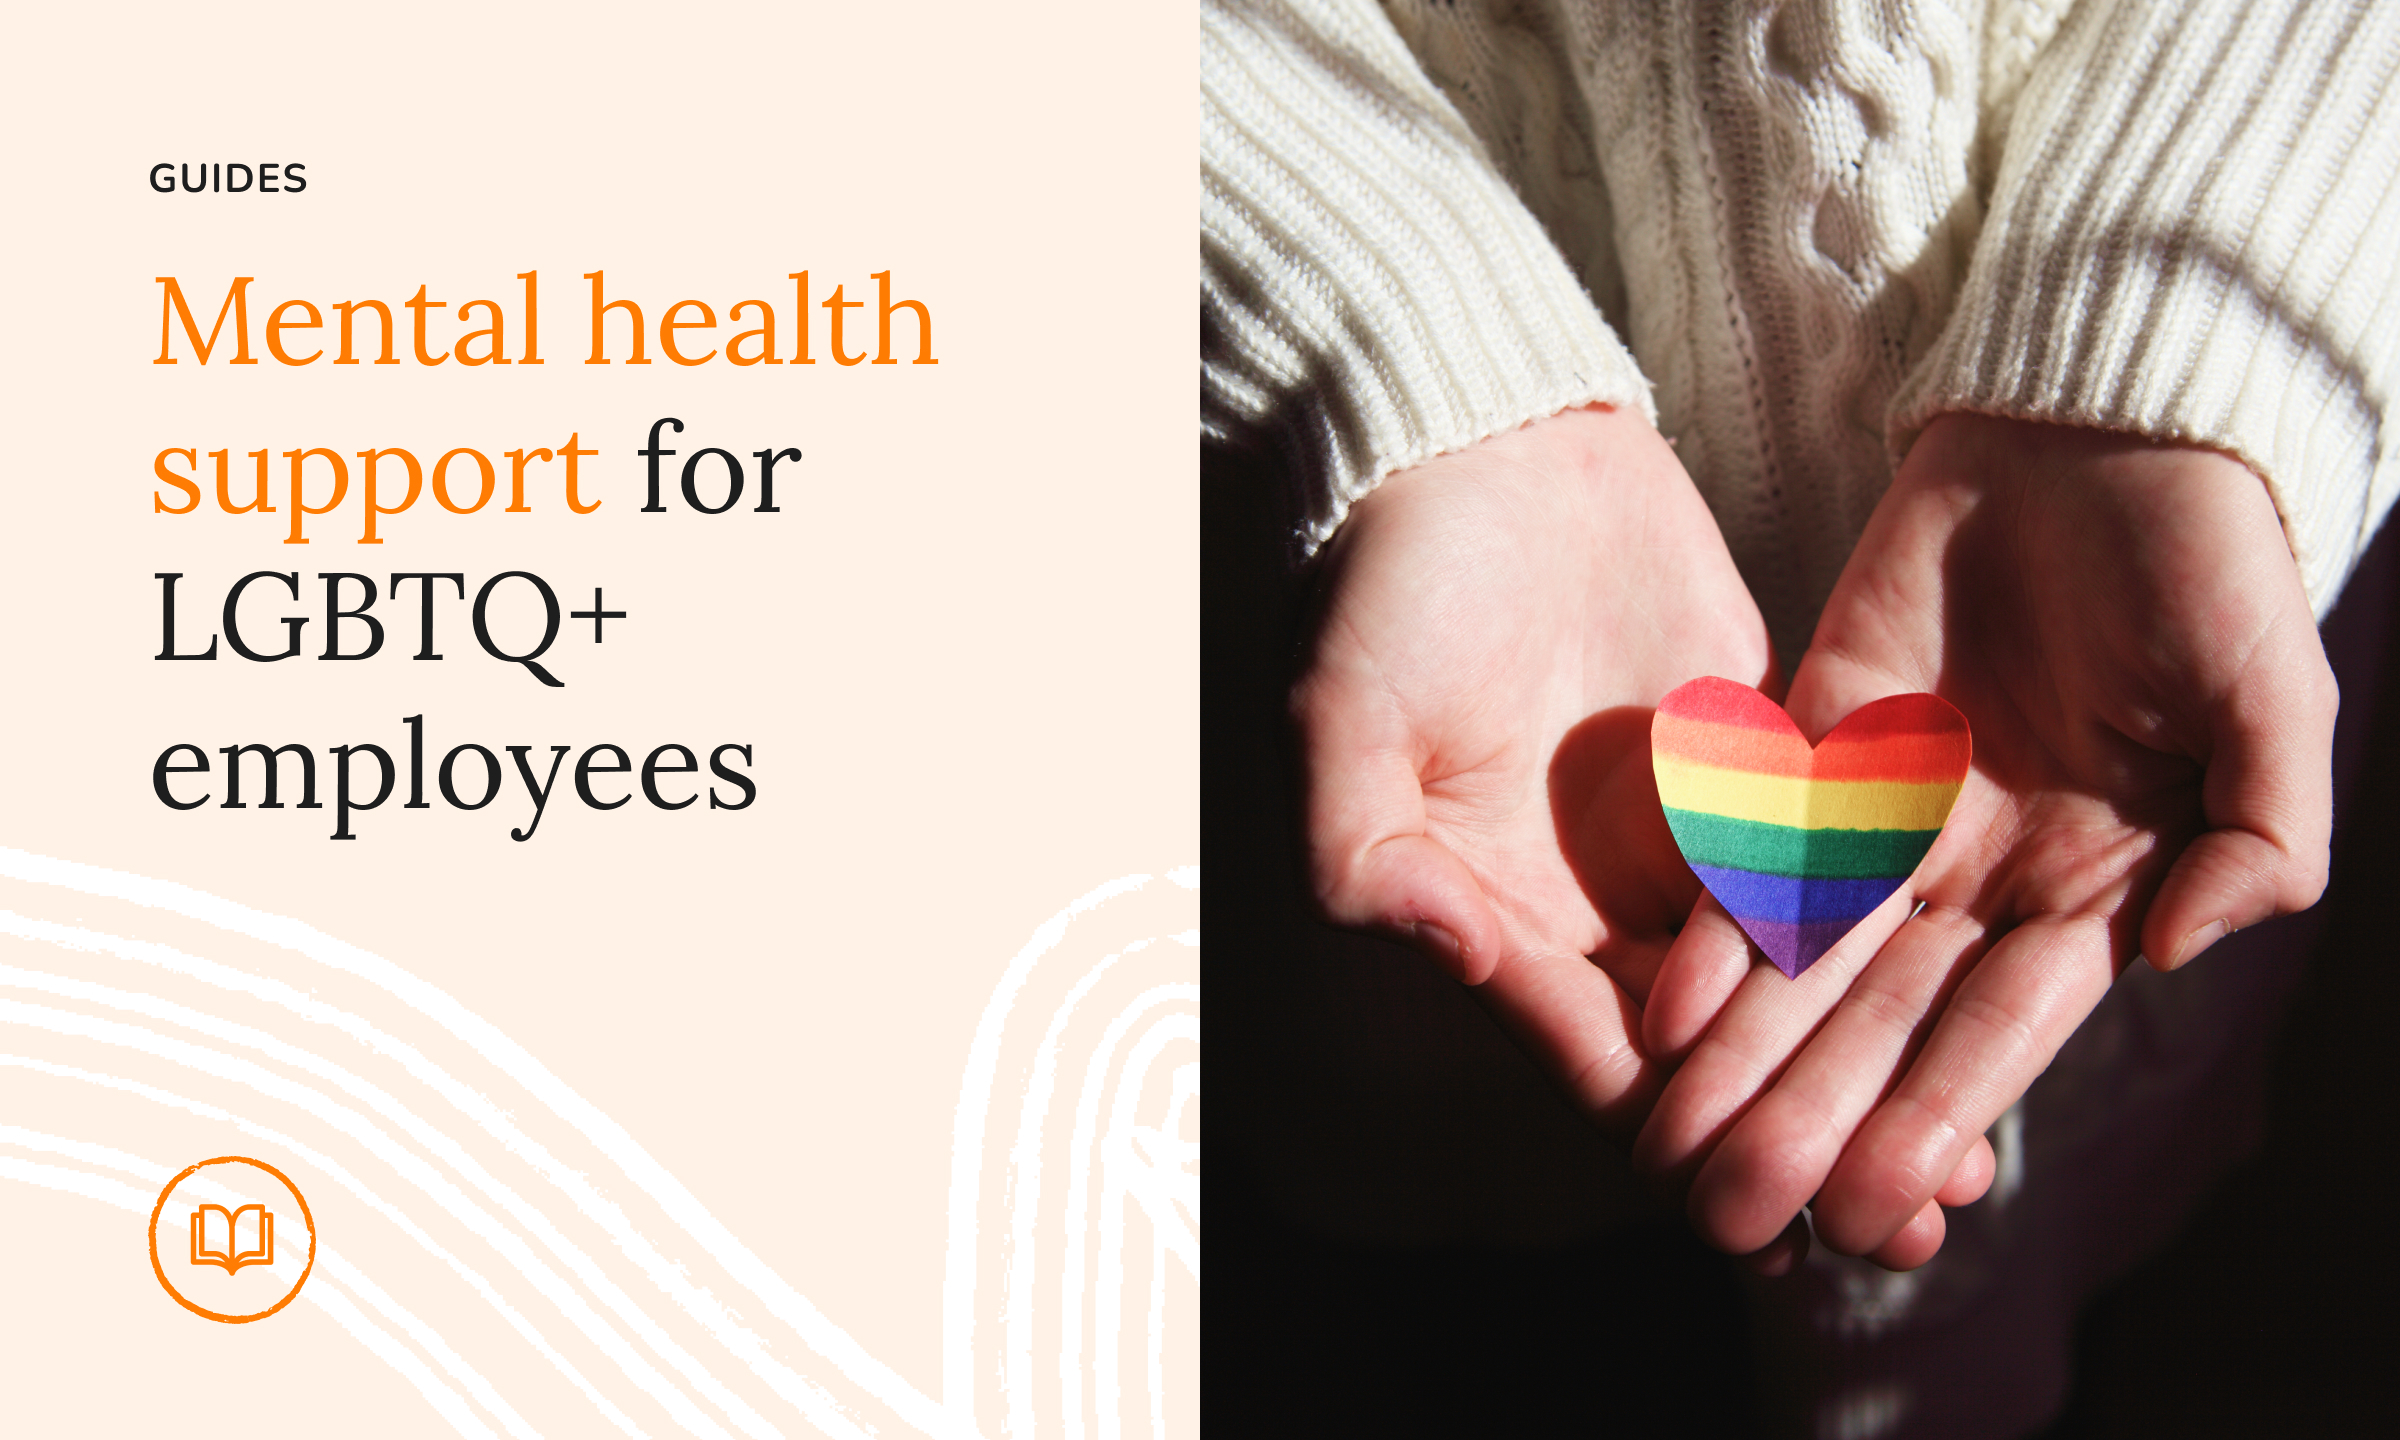 Mental health support for LGBTQ+ employees